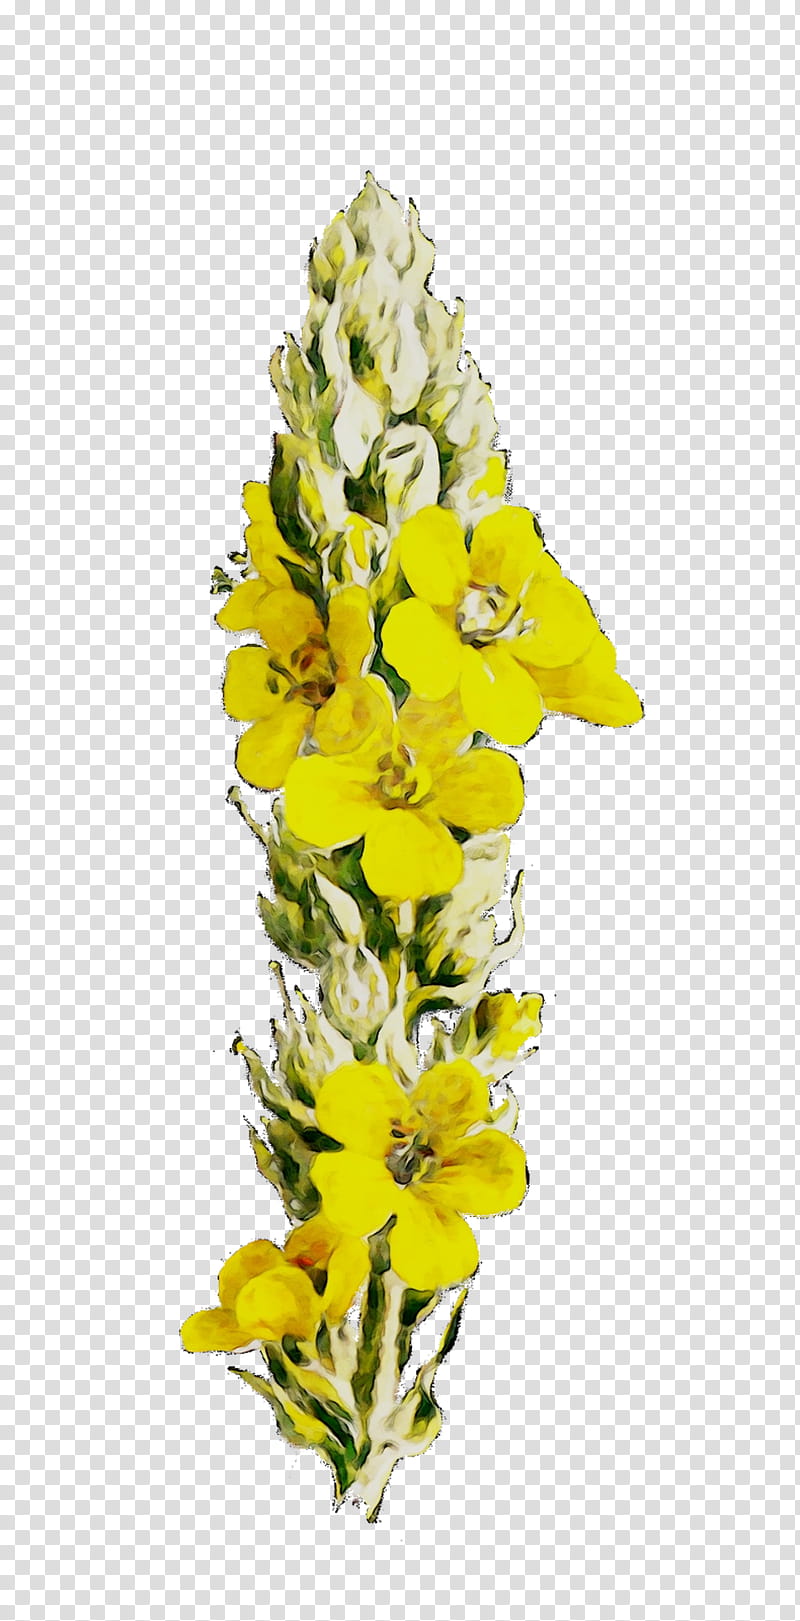 Flowers, Cut Flowers, Floral Design, Mullein, Yellow, Plants, Verbascum, Yellow Toadflax transparent background PNG clipart